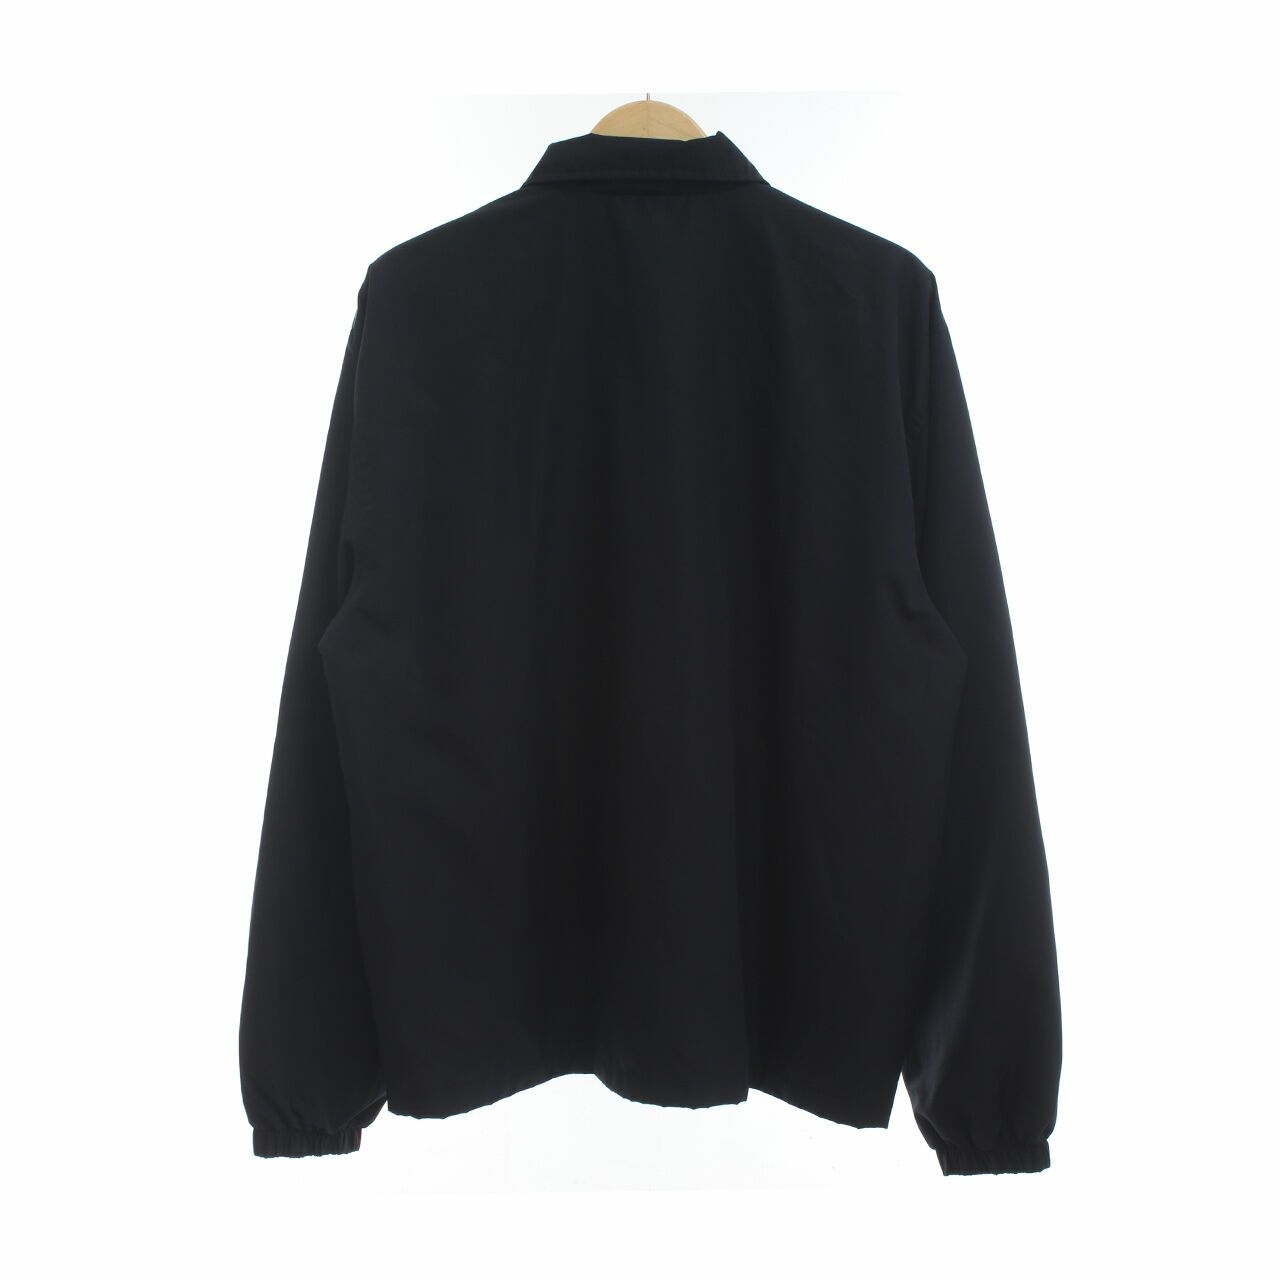 Private Collection Black Jacket